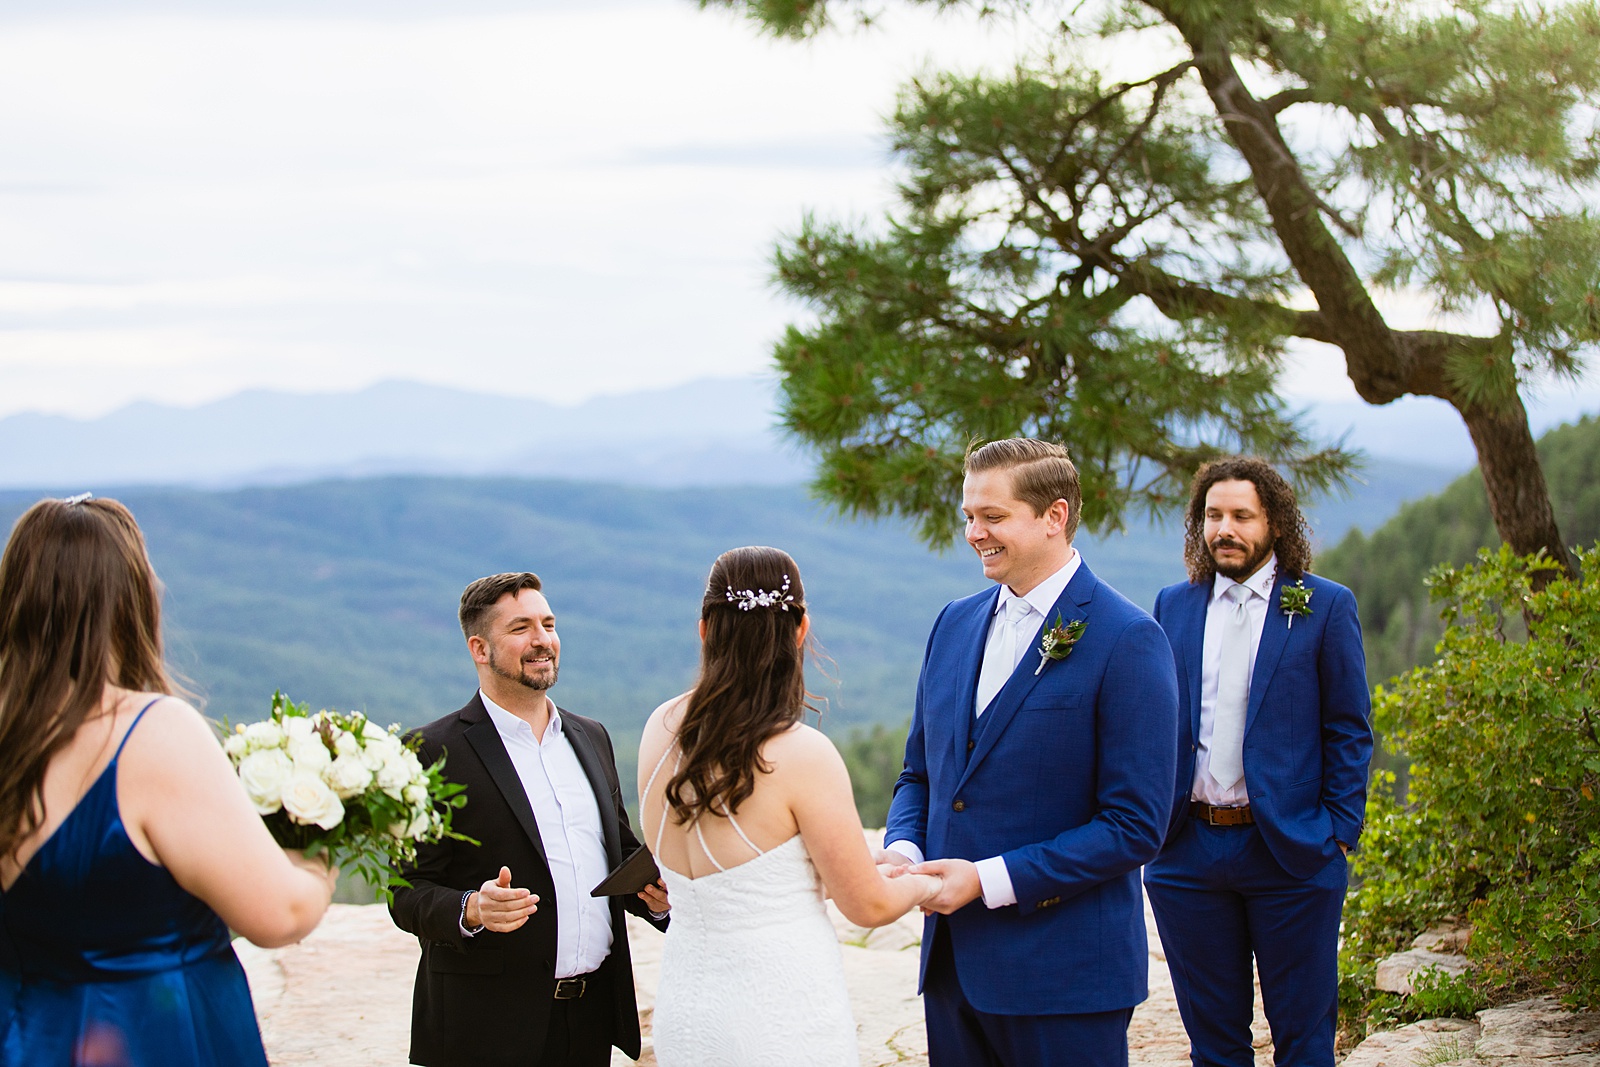 Groom looking at his bride during their wedding ceremony at Mogollon Rim by Payson elopement photographer Juniper and Co Photography.